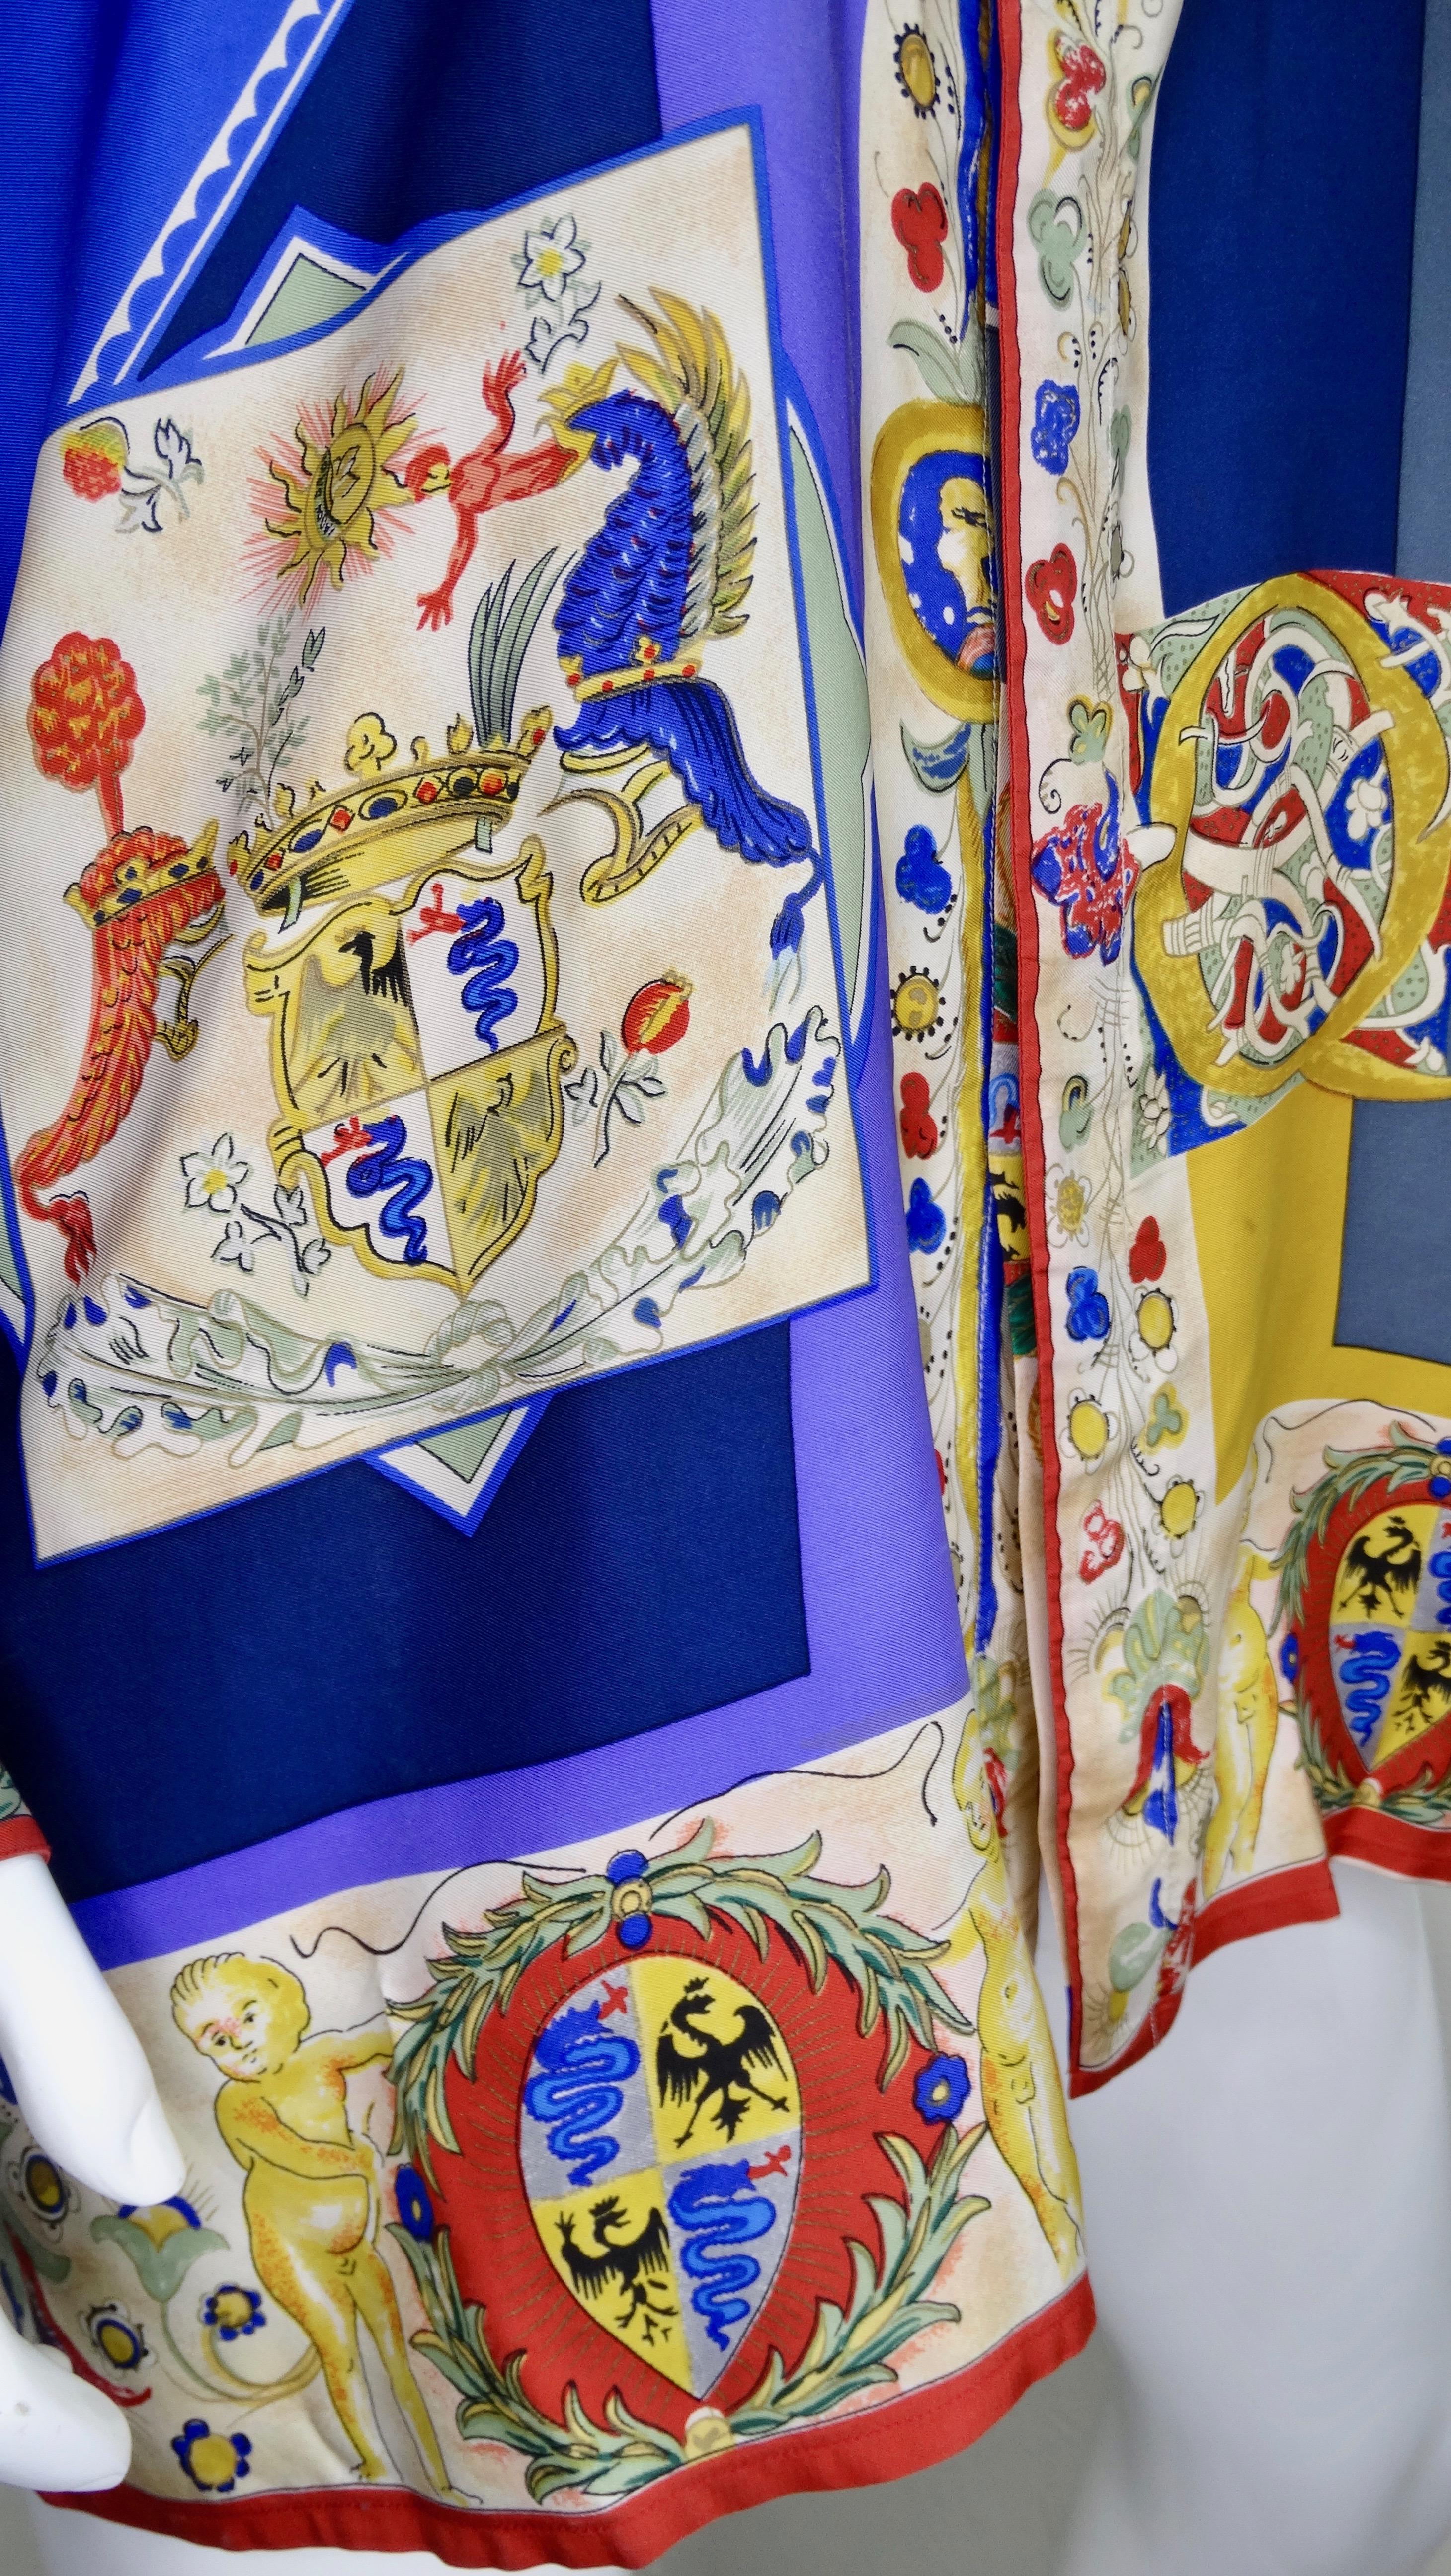 Gianni Versace 1990s Coat of Arms Silk Shirt  For Sale 4